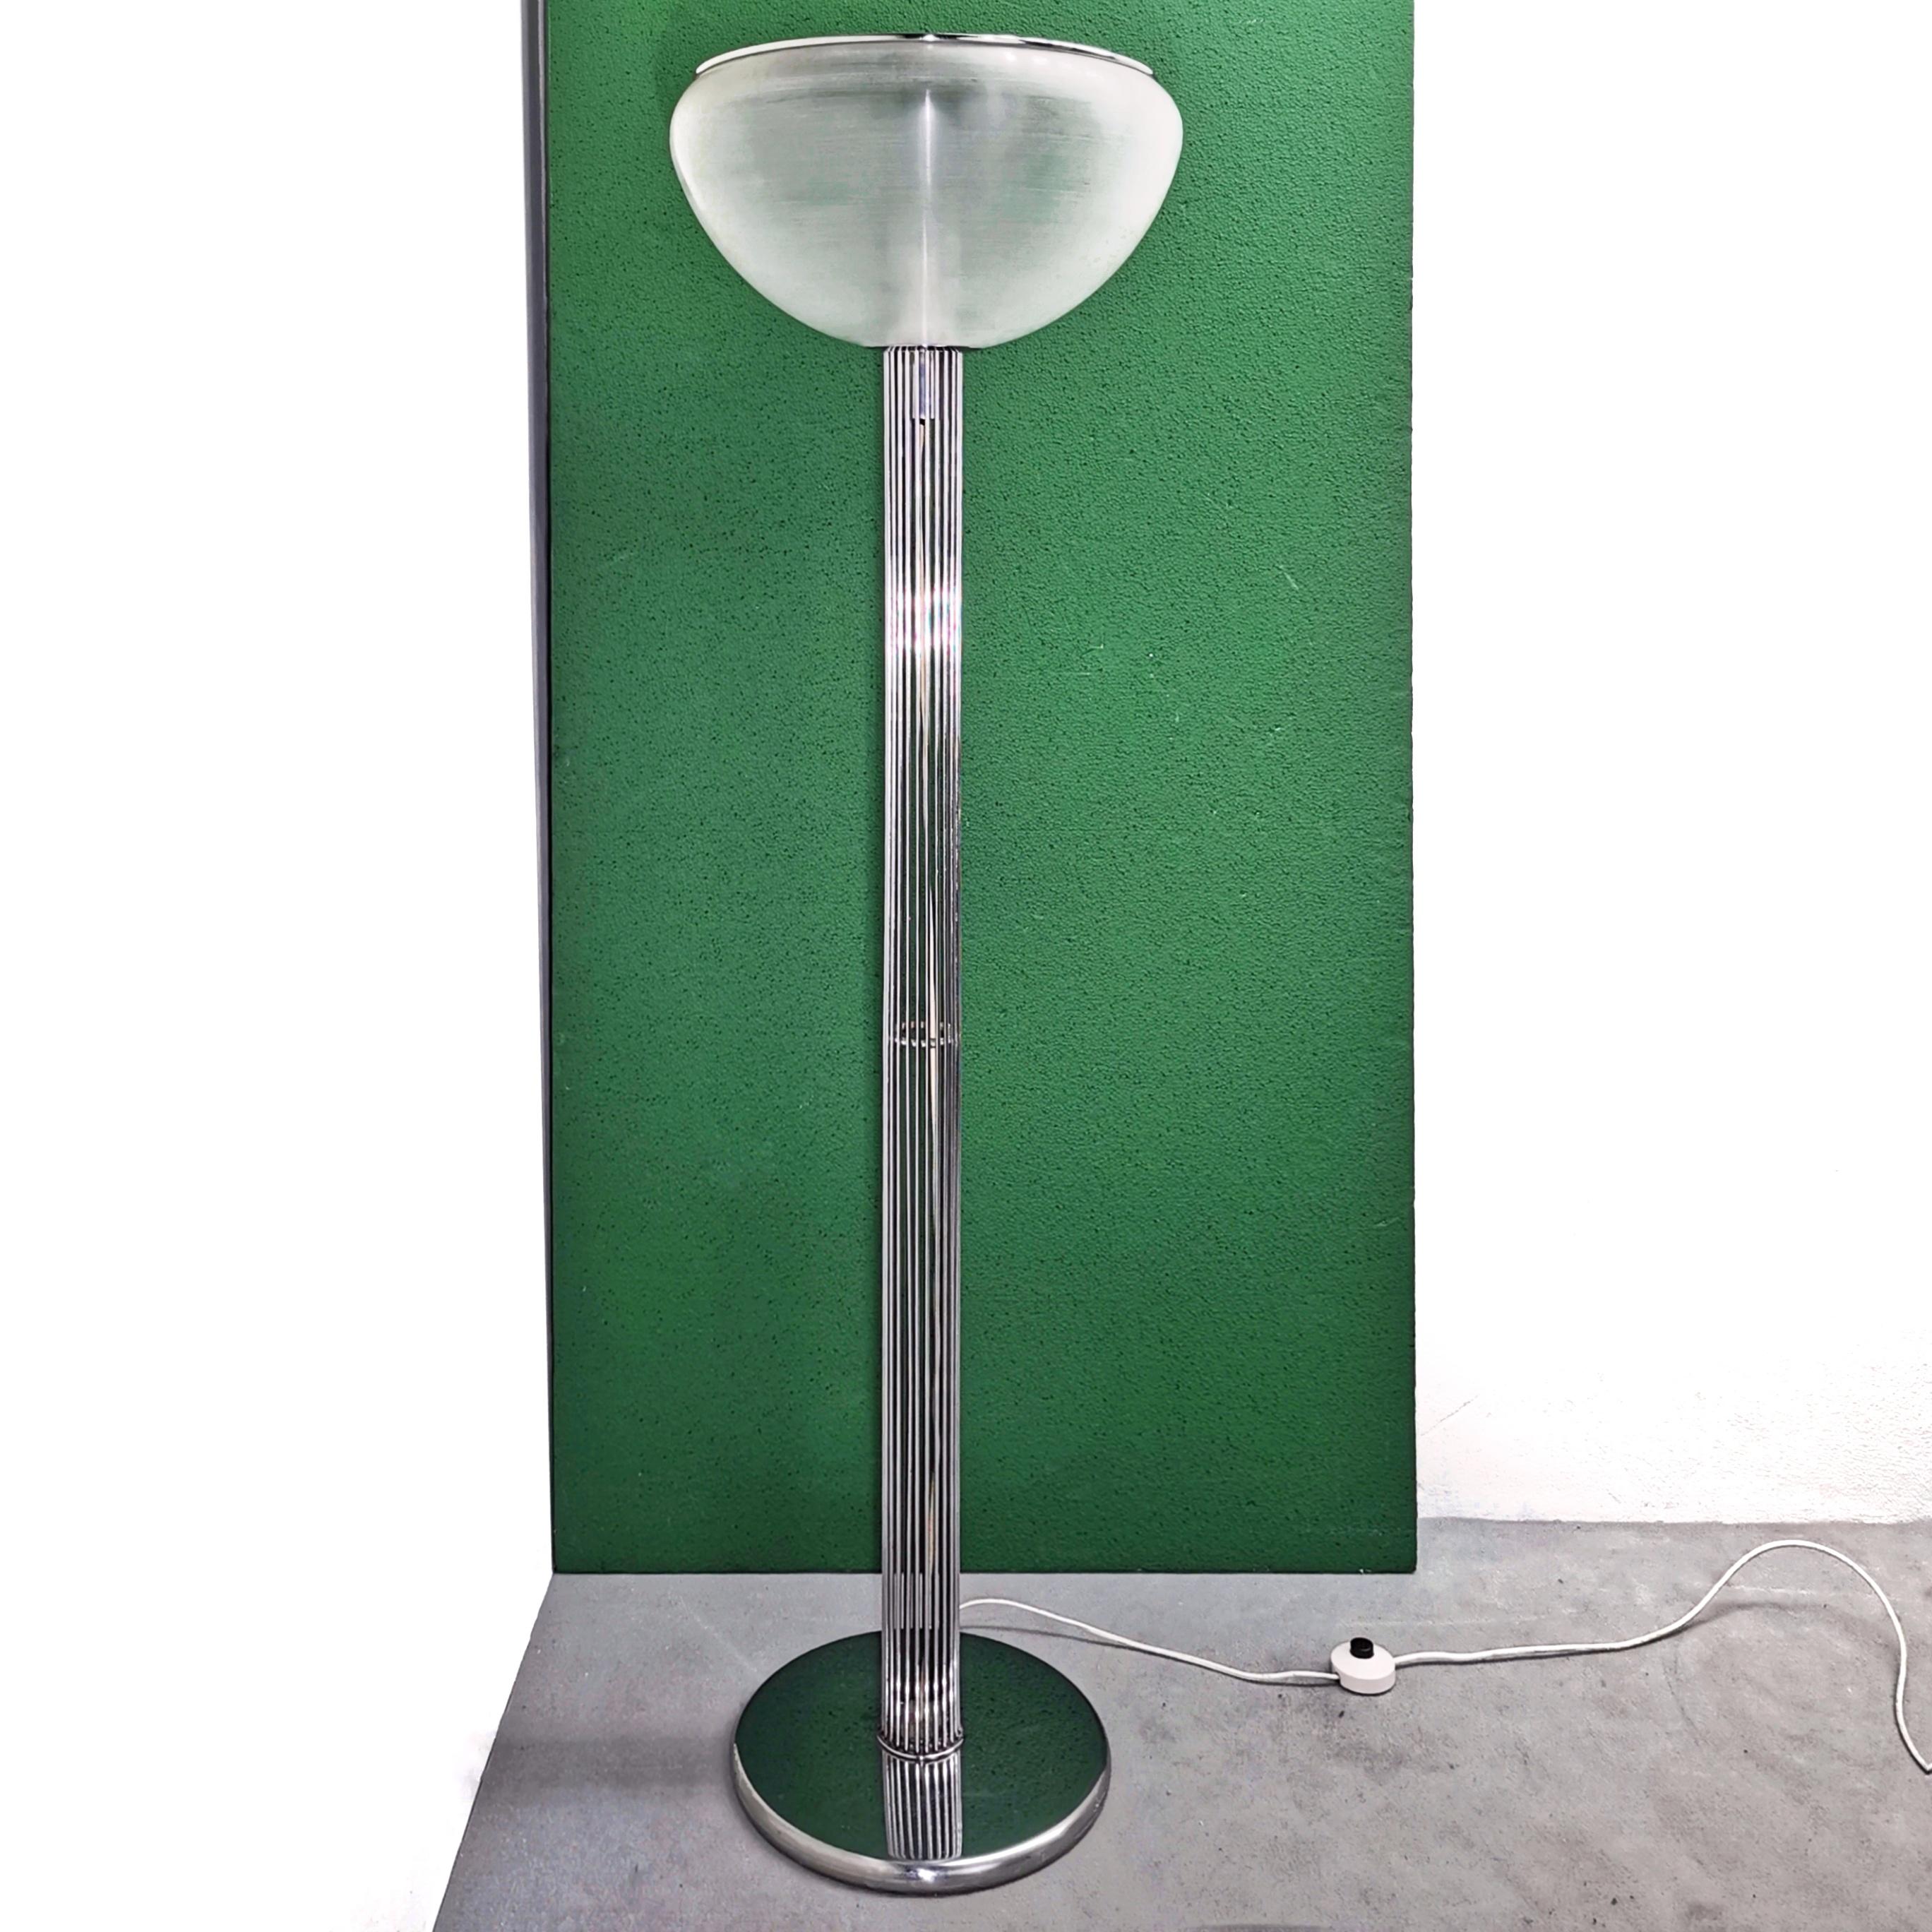 Floor lamp model Moana designed in the 1970s by Luigi Massoni for Guzzini. Chrome rods stem and matte brushed acrylic lampshade with the chrome cover. 
Guzzini trademark present in the plastic lampshade as visible in photo
The condition of the lamp